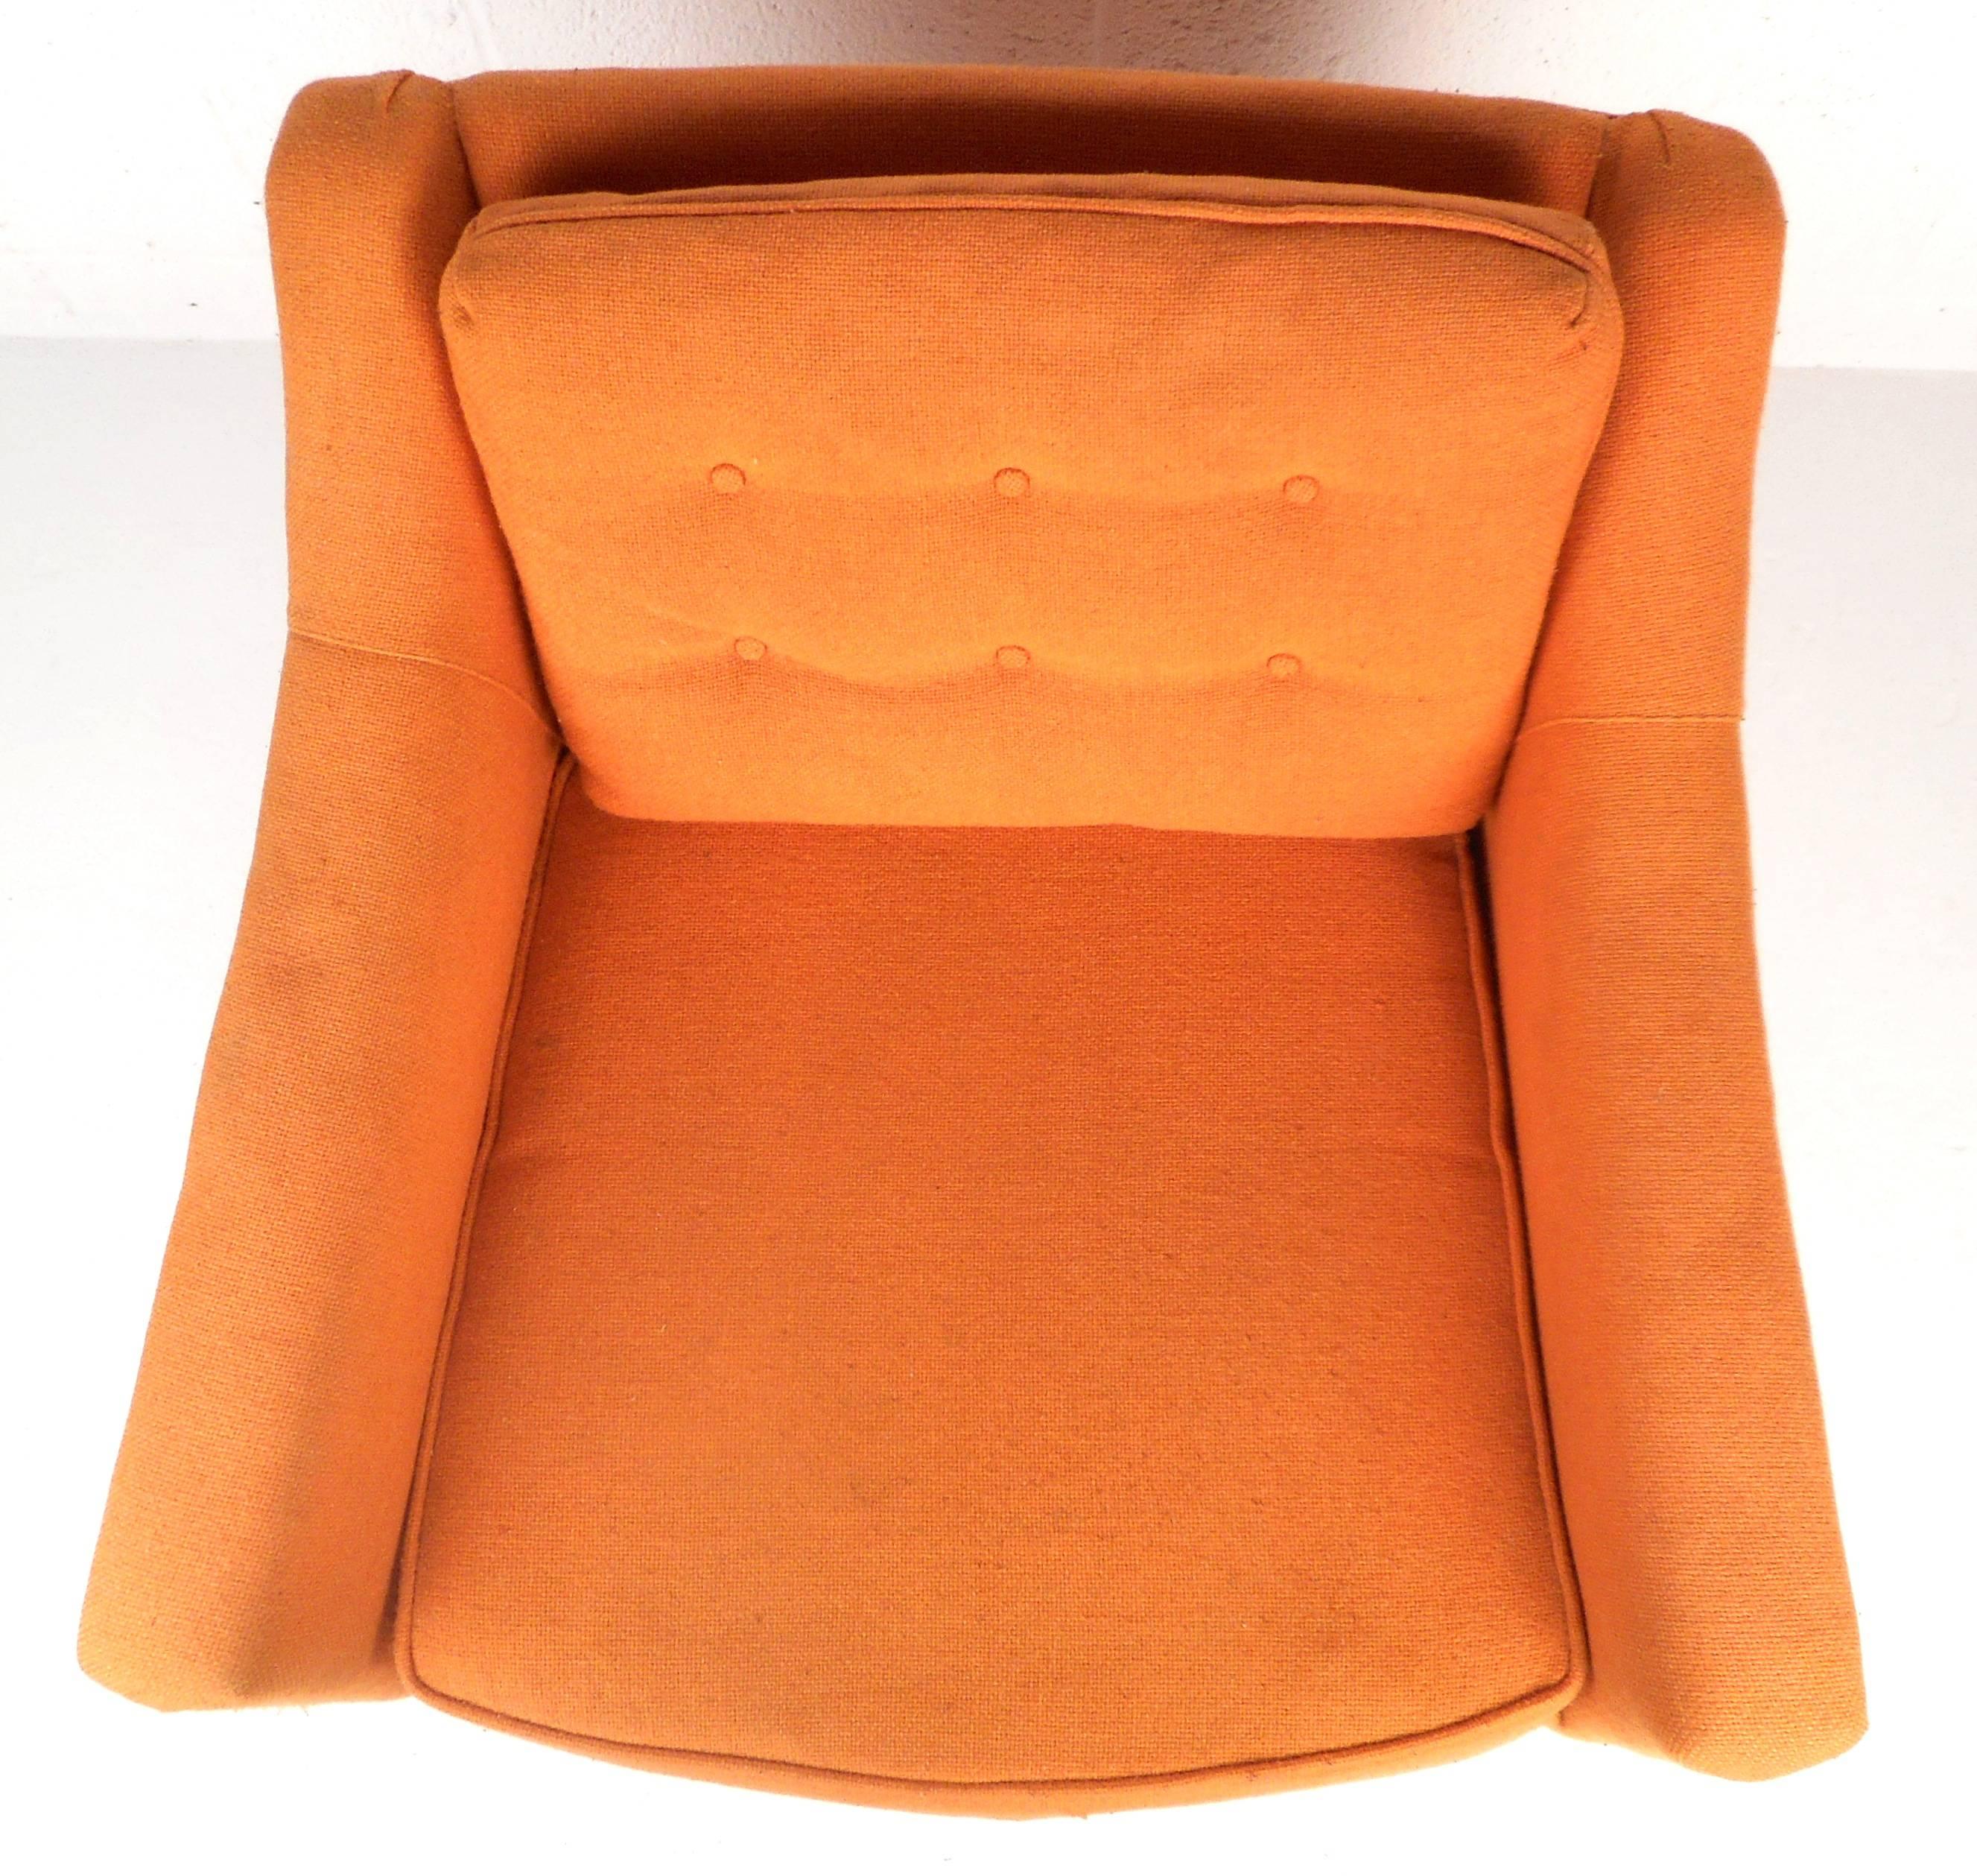 This elegant Mid-Century lounge chair by Selig features sculpted sloping armrests, tapered walnut legs, and a tufted backrest. The stylish orange upholstery adds to the vintage appeal of the comfortable chair. Please confirm item location (NY or NJ).